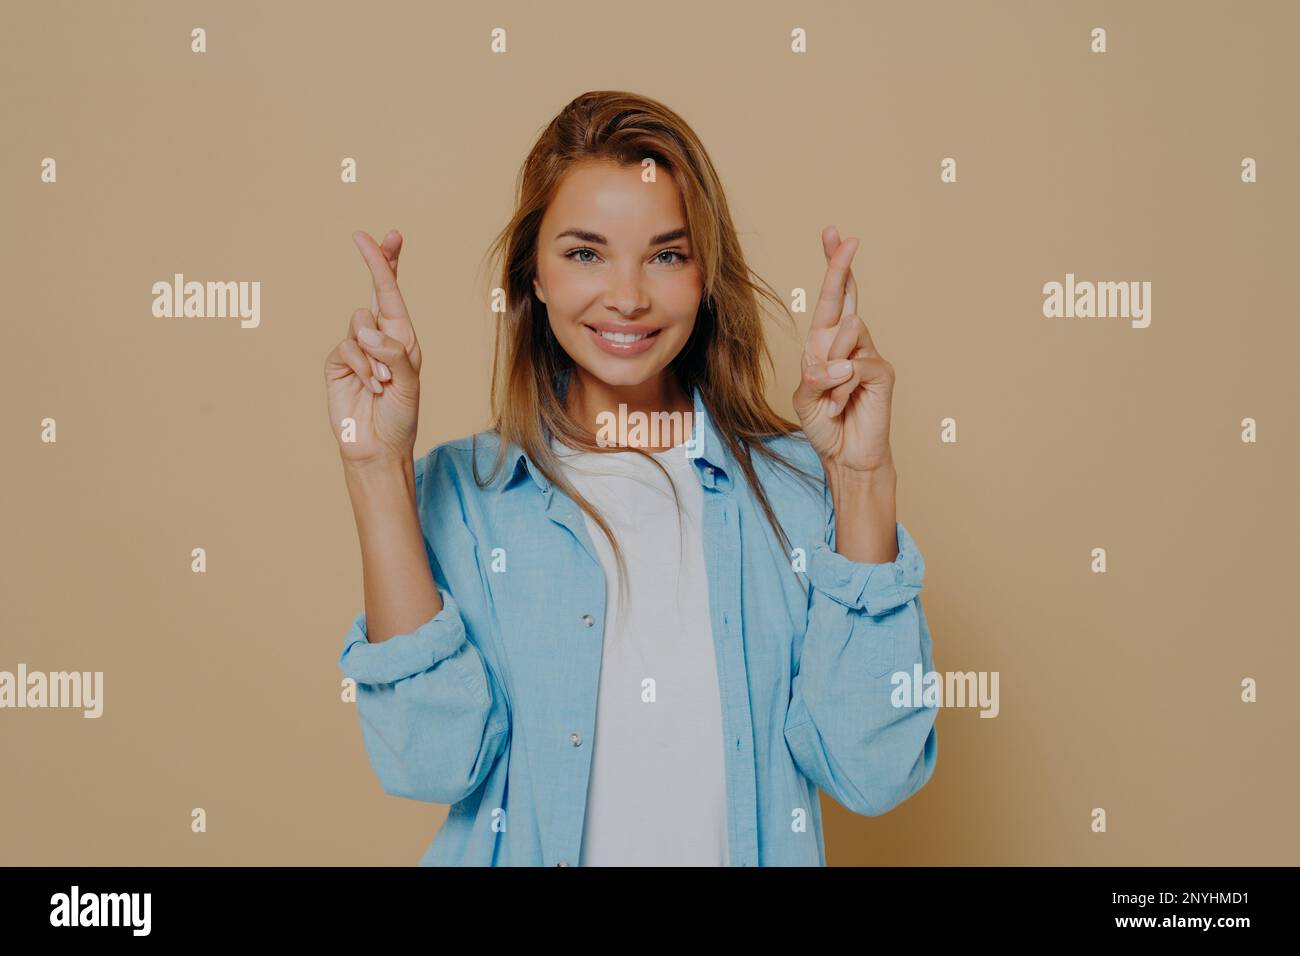 Positive superstitious young lady with beautiful smile holding her fingers crossed, making believer gesture, hoping for good luck and fulfillment of d Stock Photo